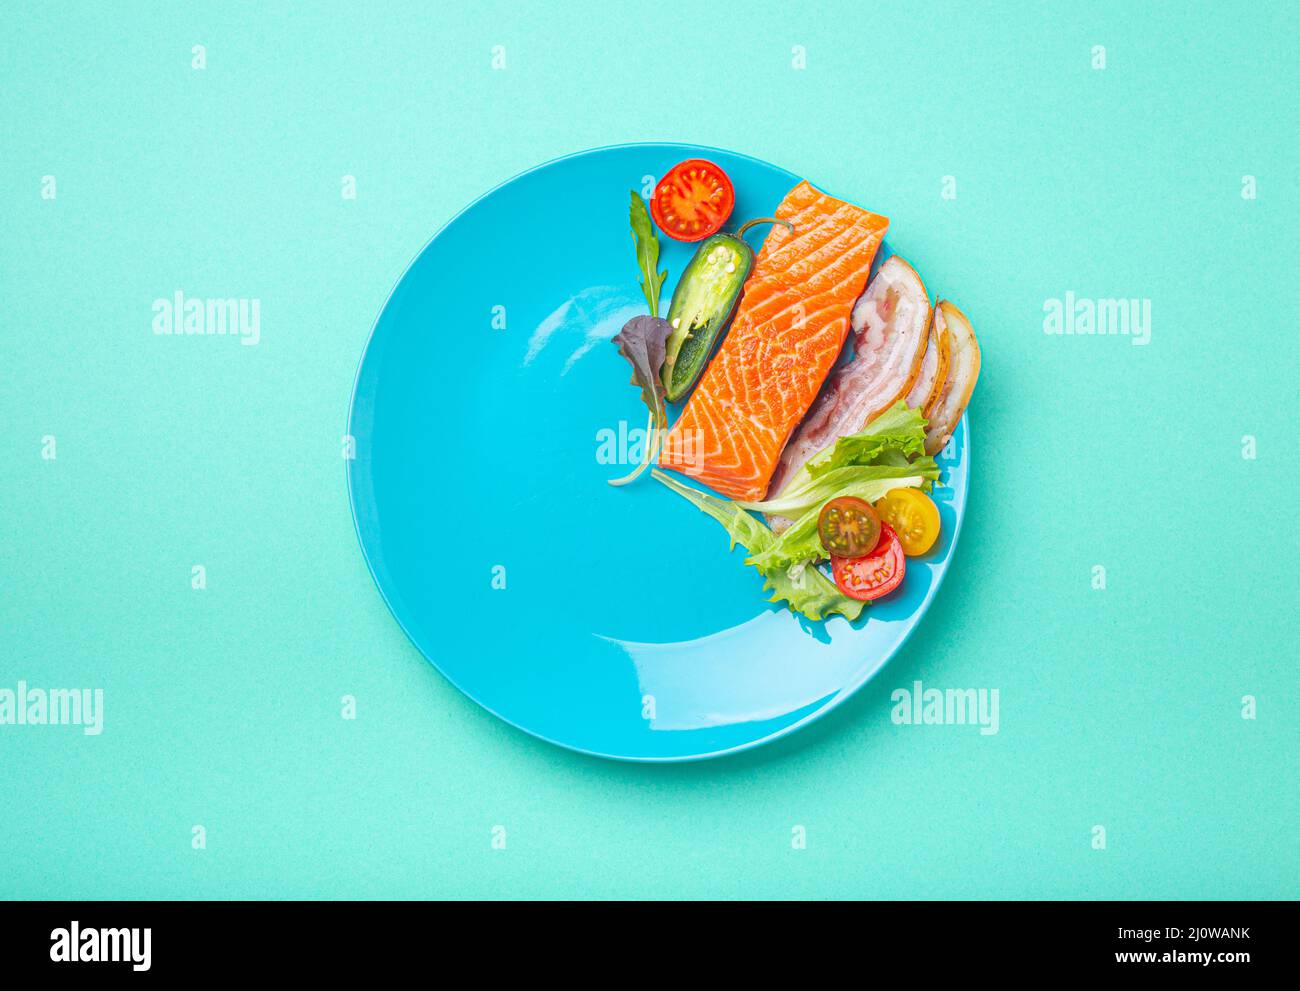 Intermittent fasting low carb hight fats diet concept flat lay, healthy food on blue plate Stock Photo